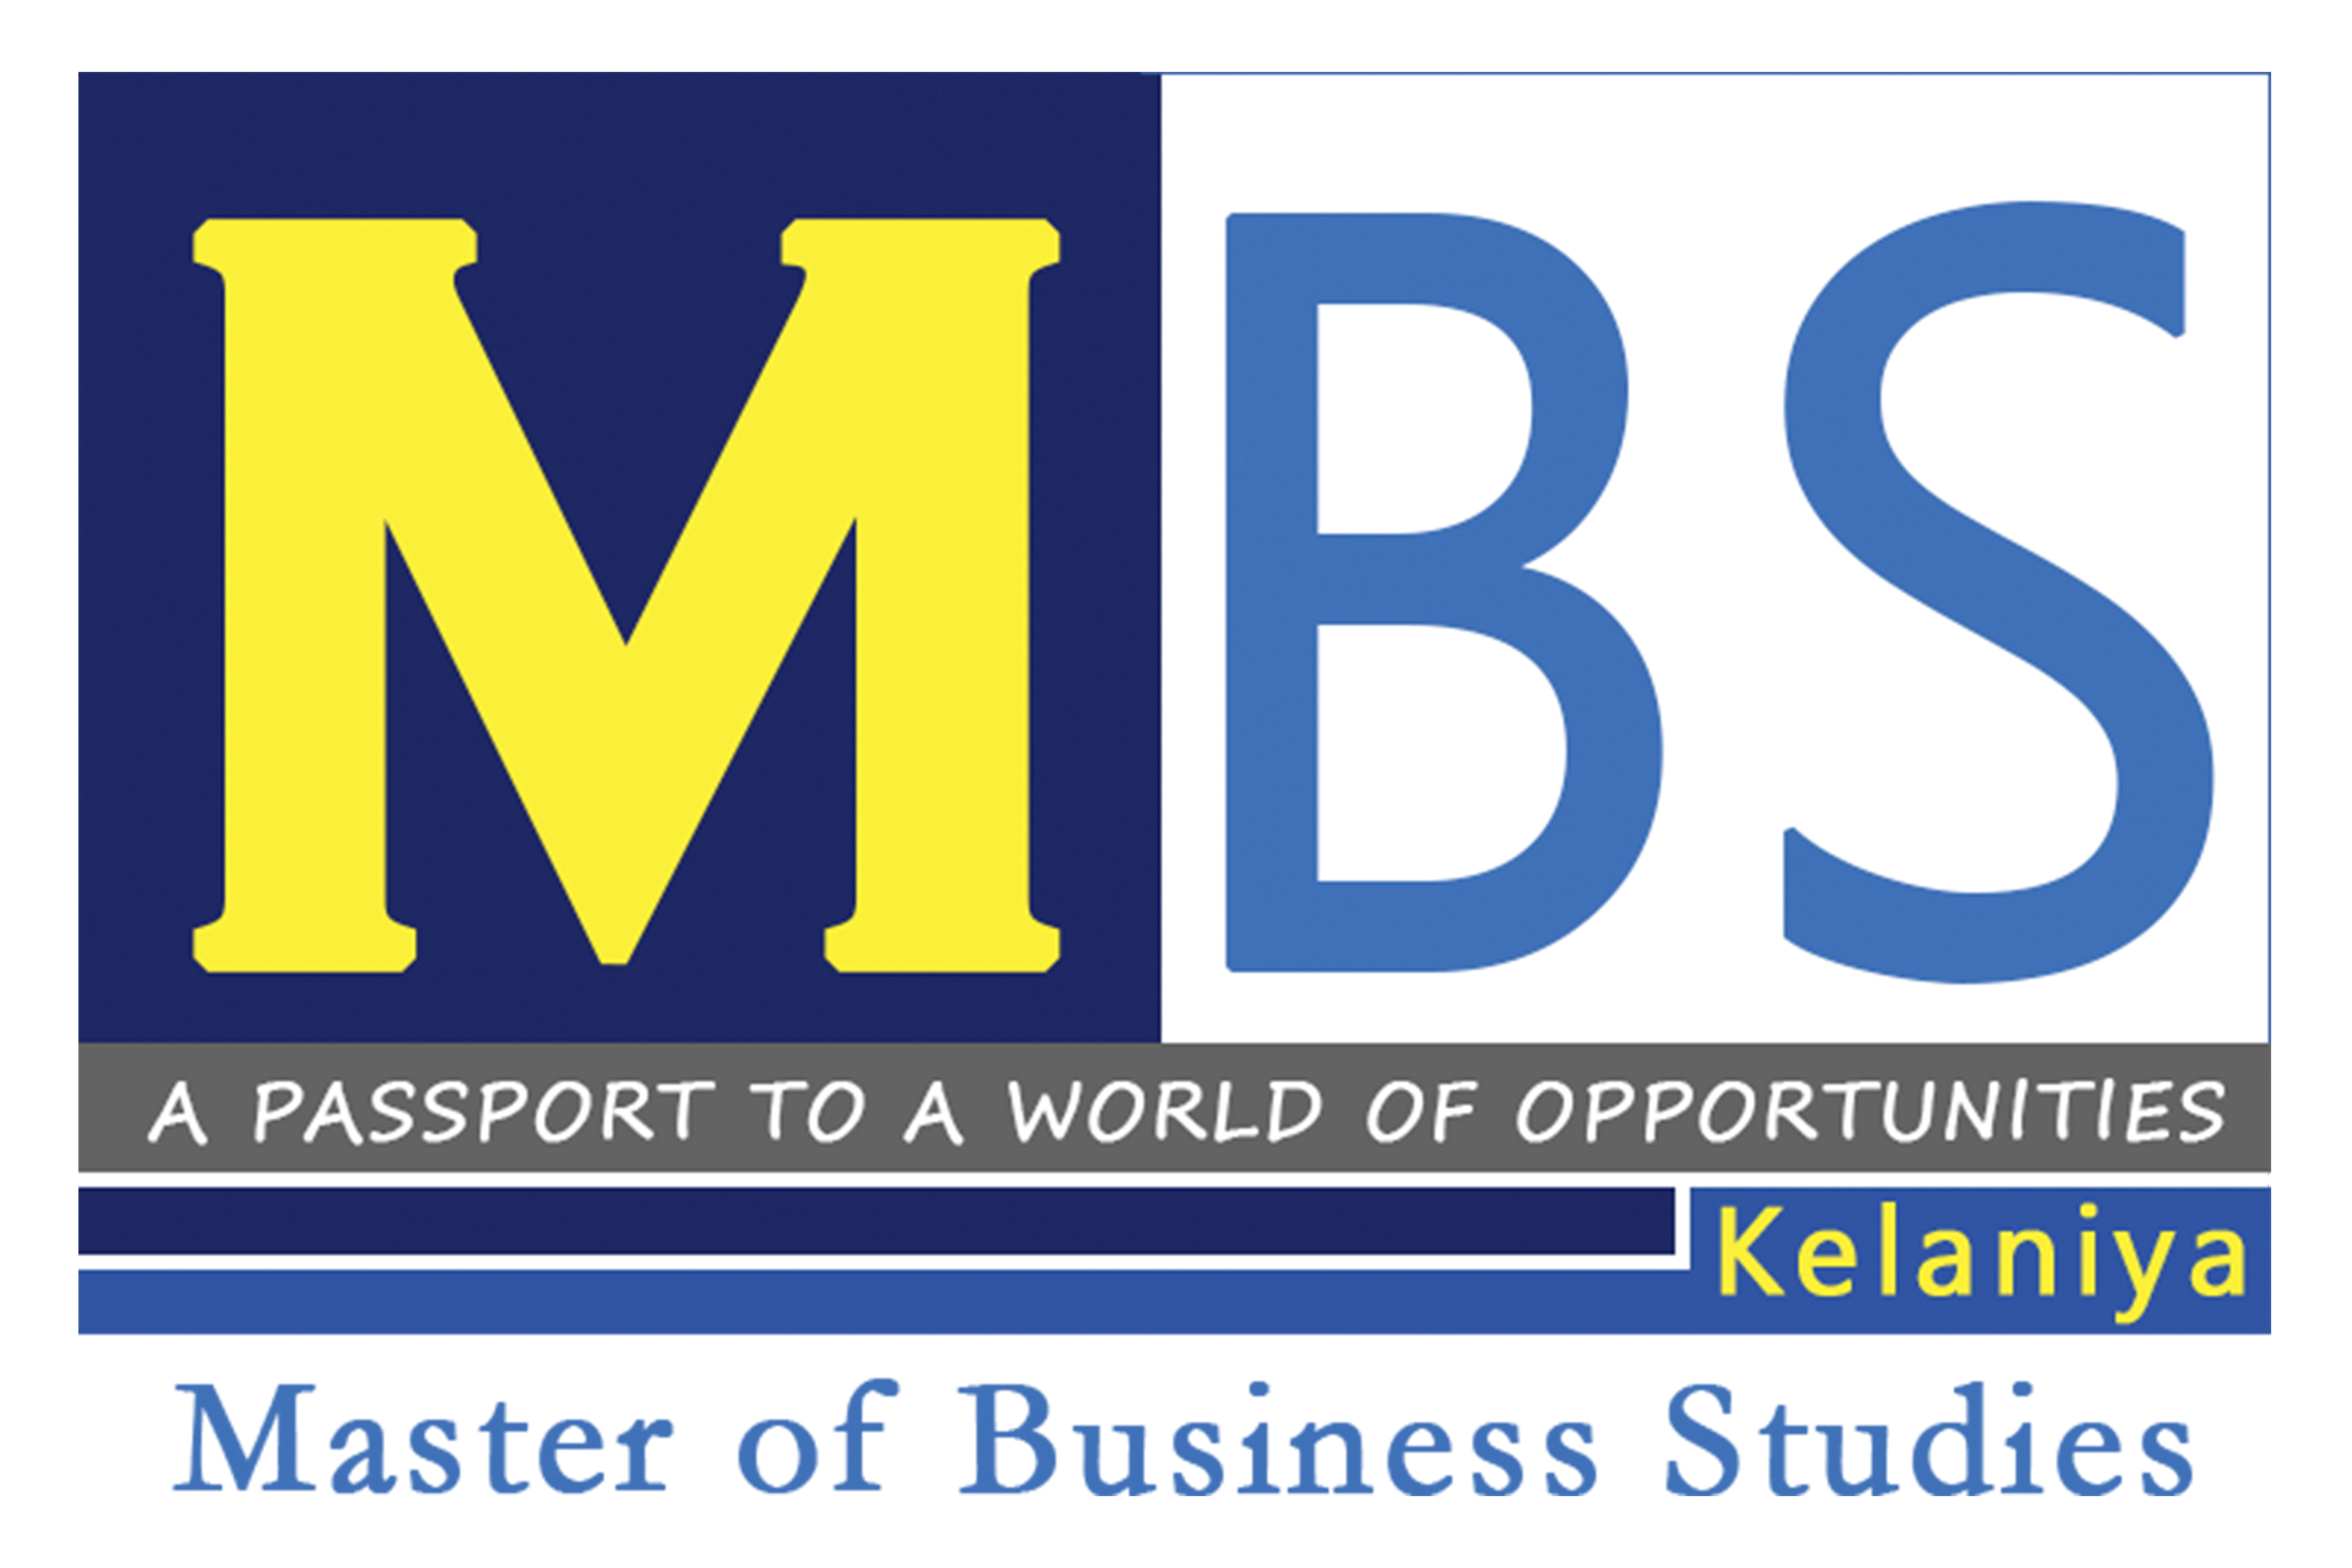 Higher Diploma in Business 